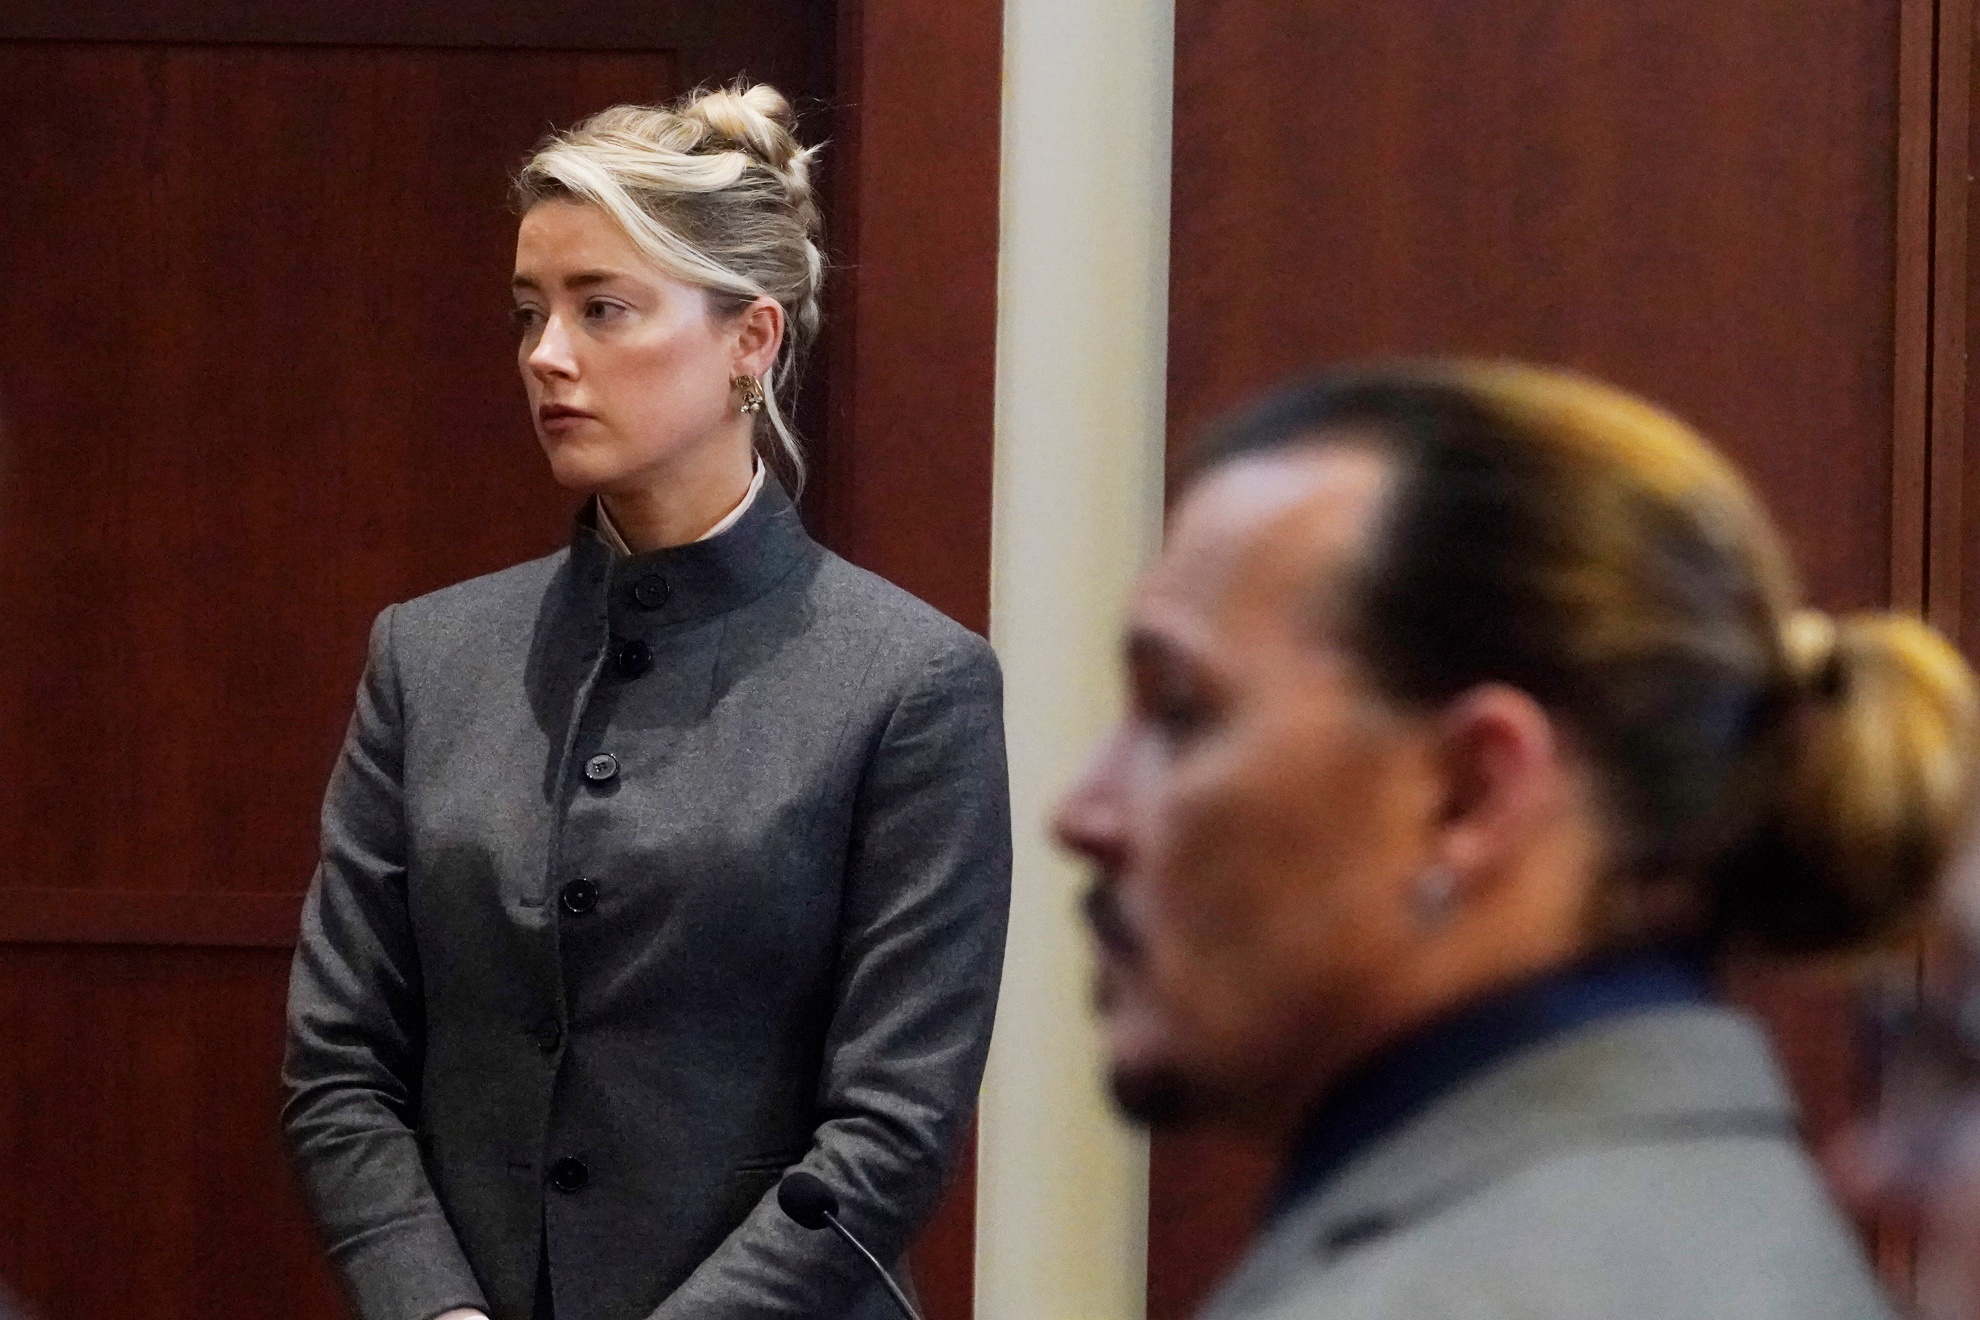 Amber Heard testifies against Johnny Depp during the trial.